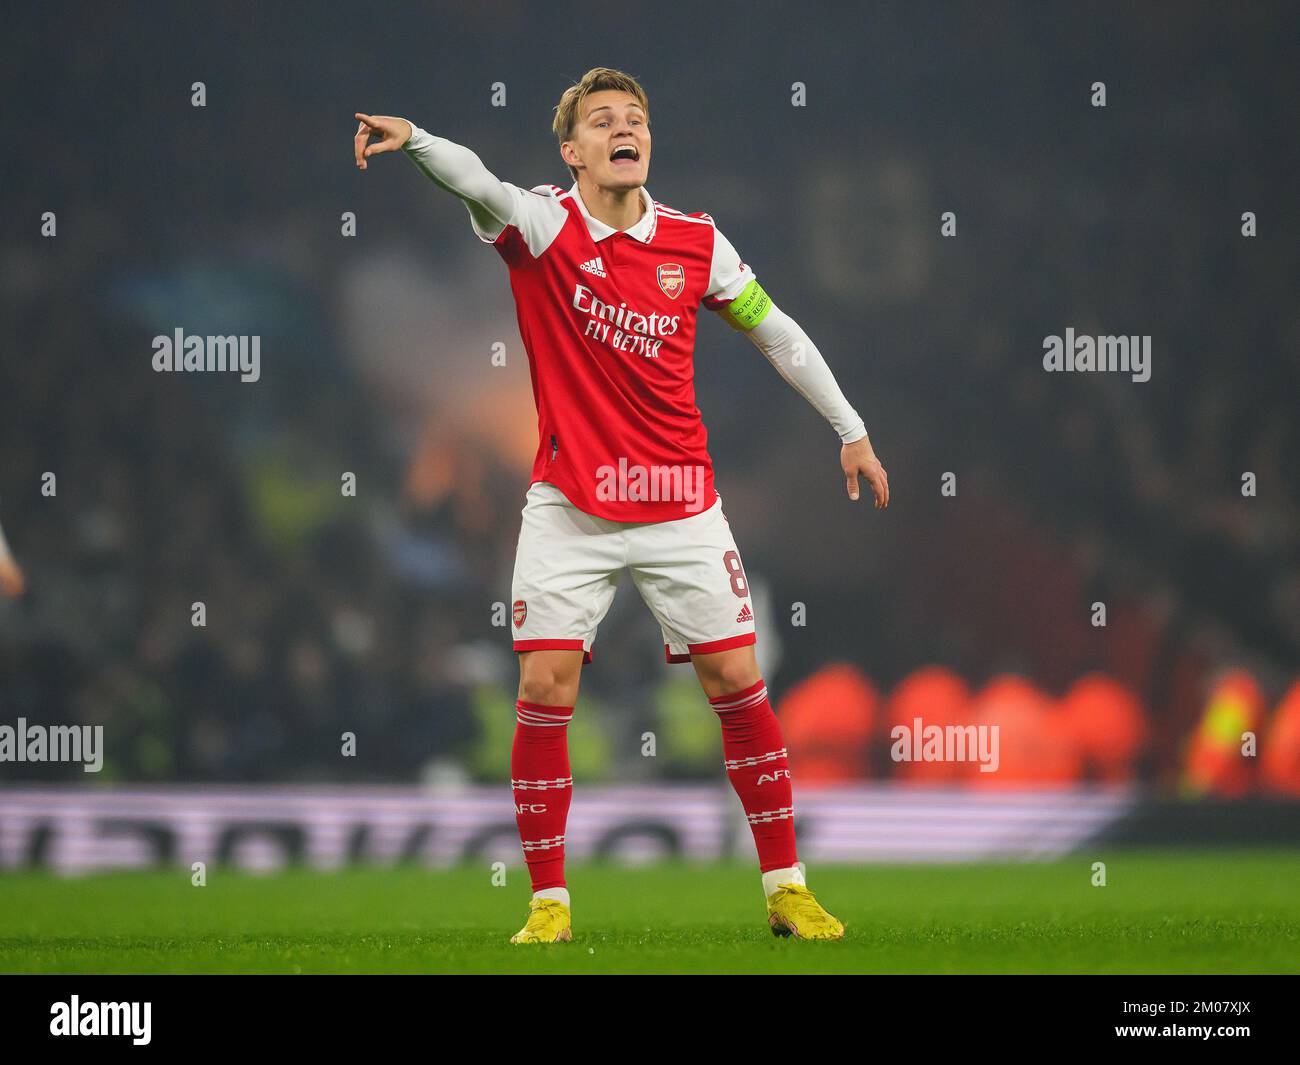 03 Nov 2022 - Arsenal v FC Zurich - UEFA Europa League - Group A - Emirates Stadium   Arsenal's Martin Odegaard during the match against FC Zurich Picture : Mark Pain / Alamy Stock Photo